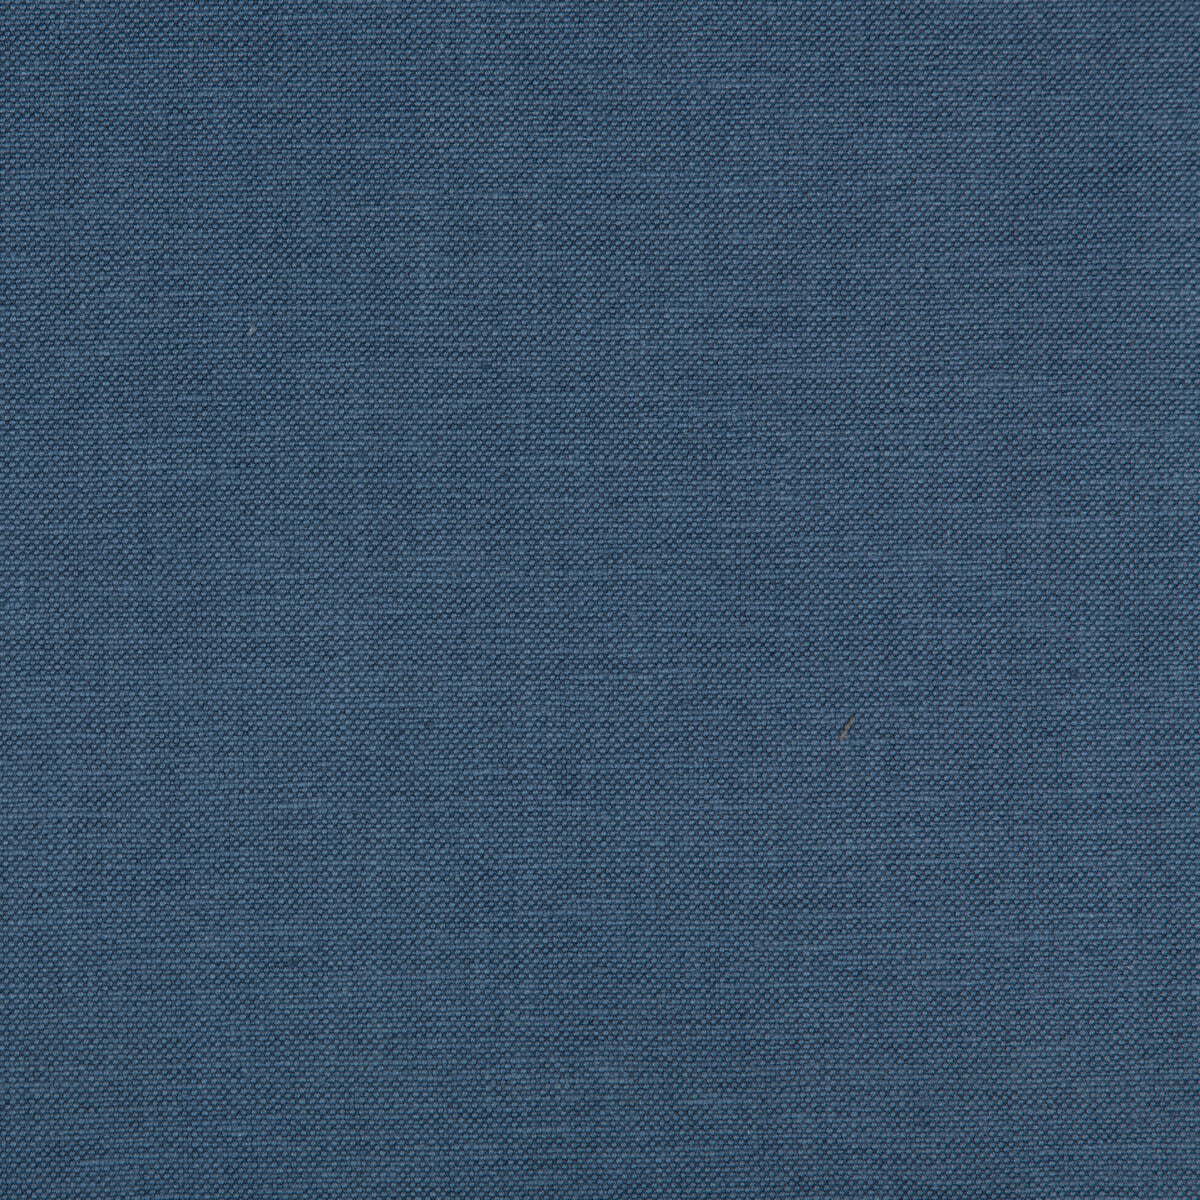 Oxfordian fabric in marine color - pattern 35543.5.0 - by Kravet Basics in the Bermuda collection